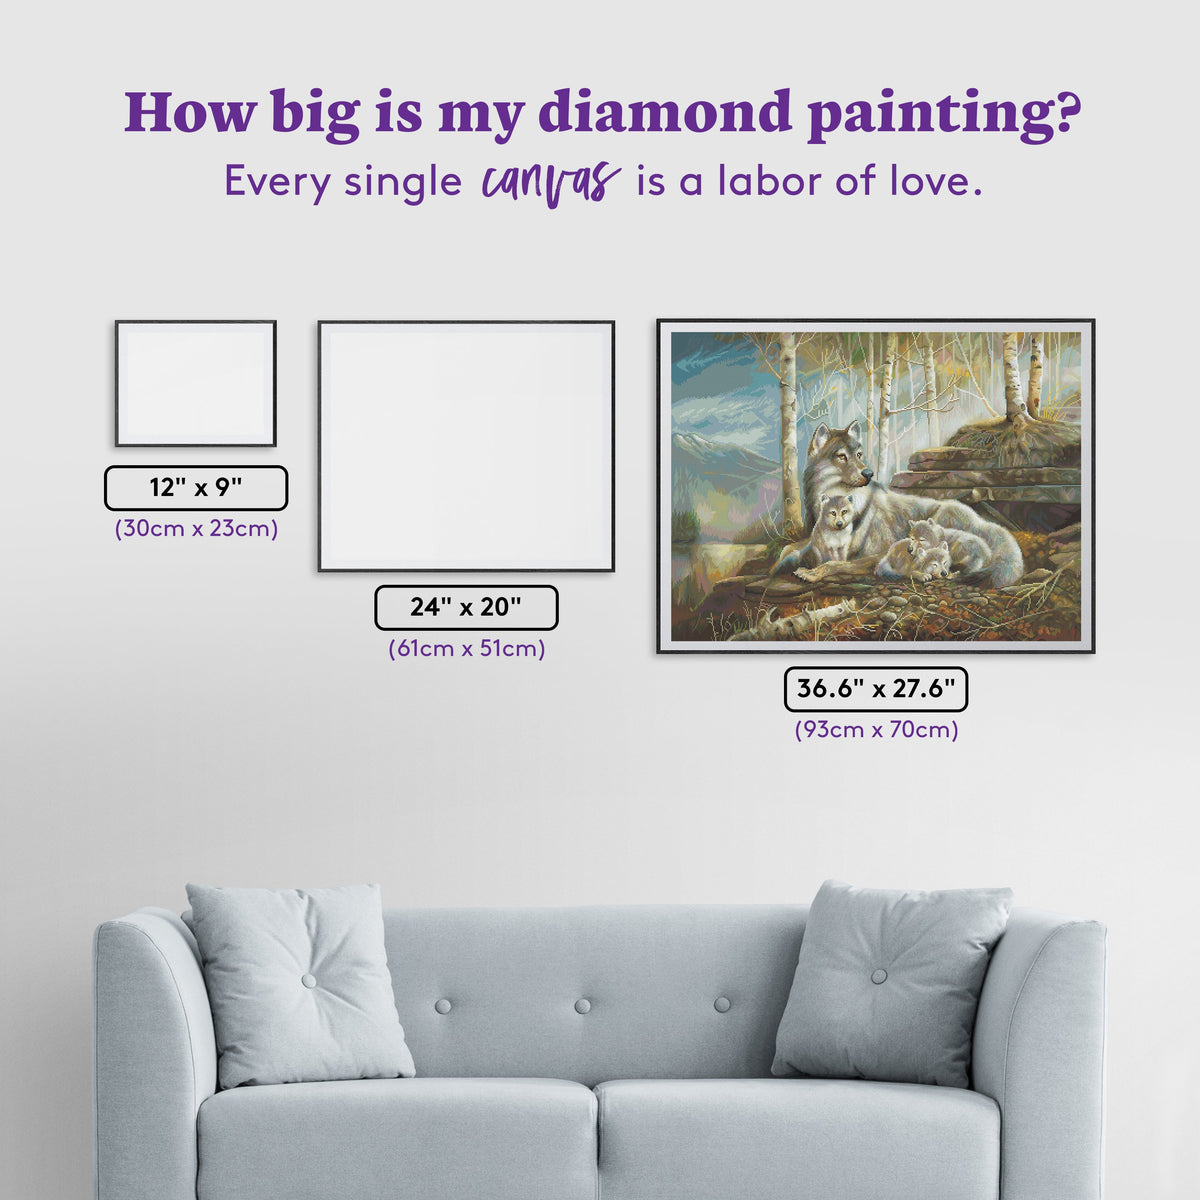 Diamond Painting Safe and Sound 36.6" x 27.6" (93cm x 70cm) / Square with 74 Colors including 2 ABs and 3 Fairy Dust Diamonds / 104,813